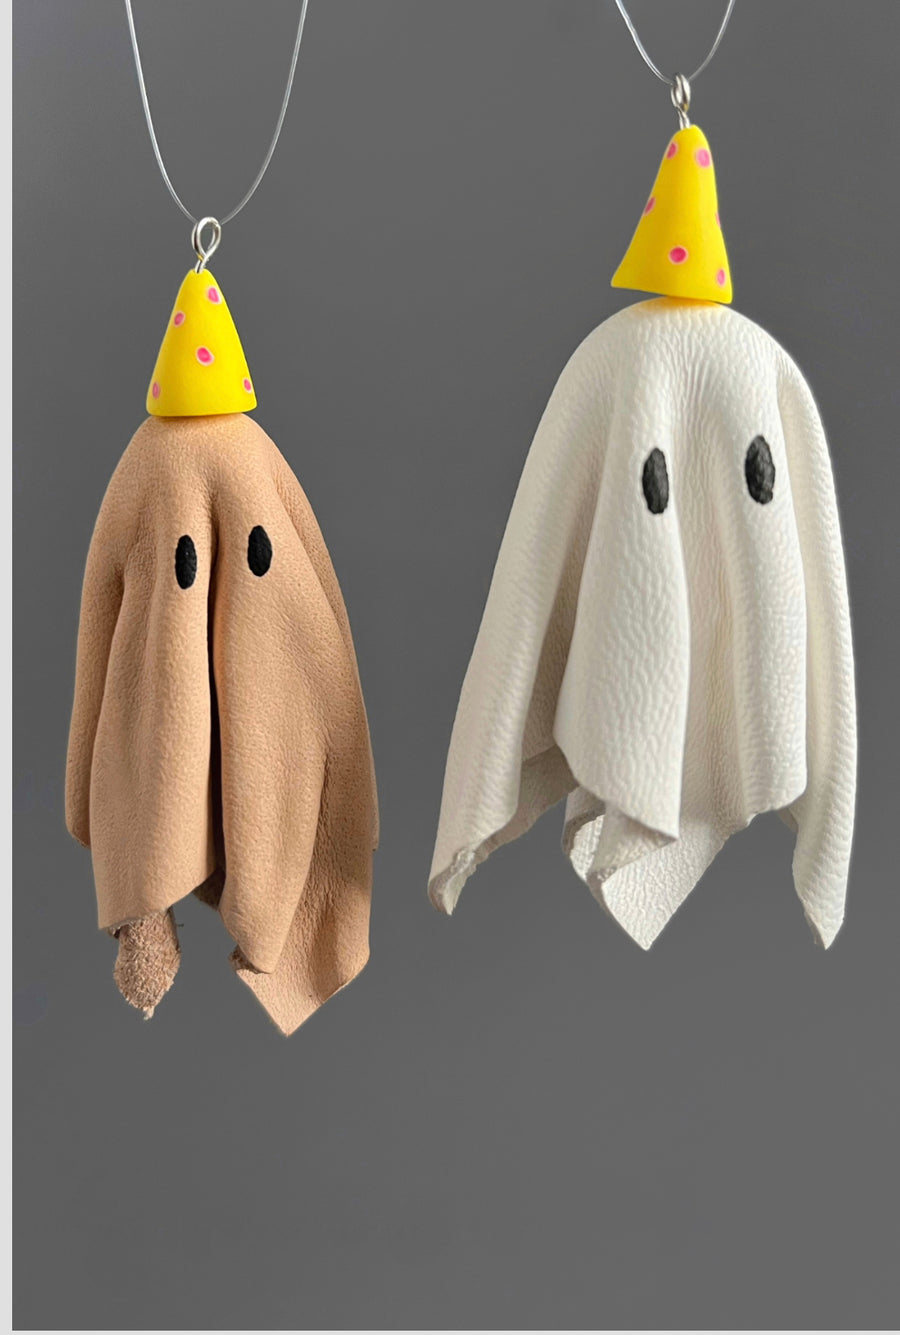 Little Leather Ghosties - Free Shipping!